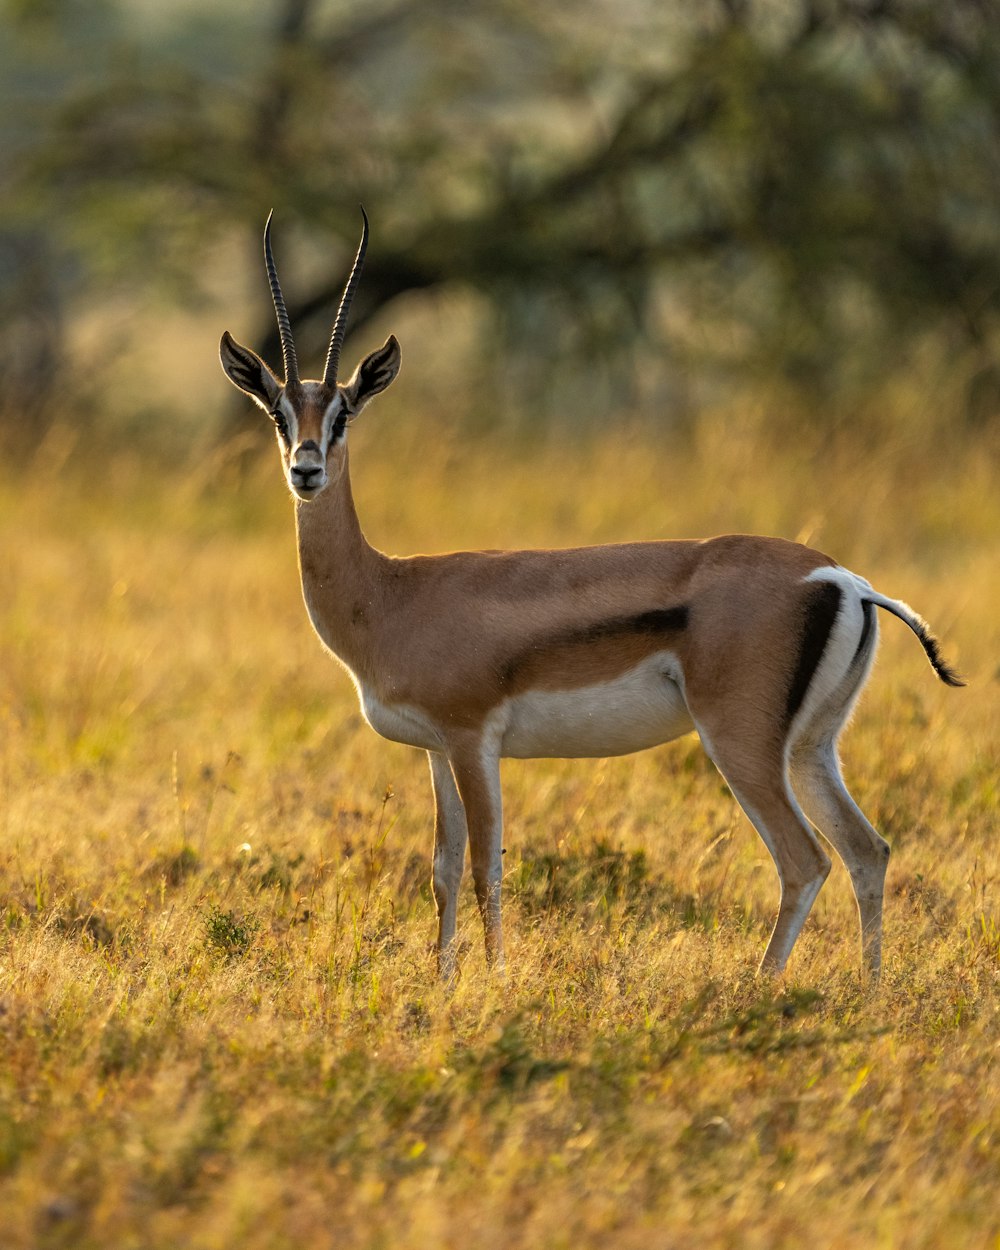 a gazelle standing in a grassy field with trees in the background